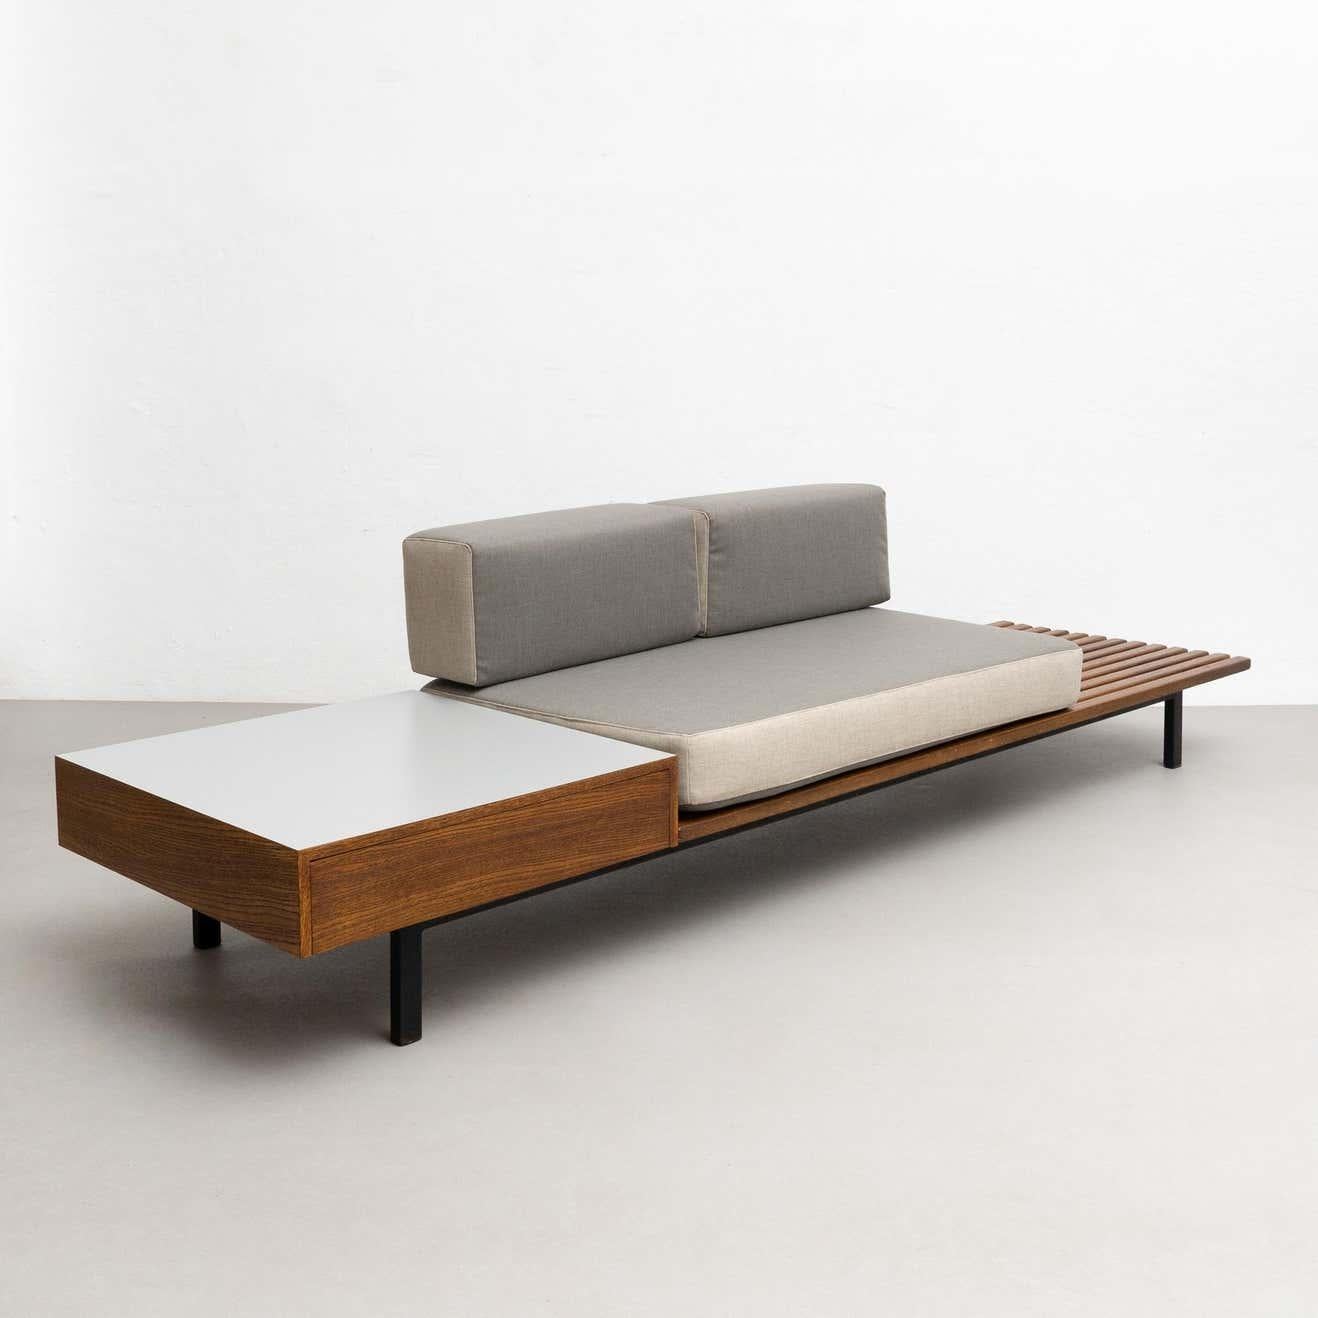 Bench with side table and drawer and cushions from Cite Cansado, Mauritania.

Designed by Charlotte Perriand in France circa 1958.

Mahogany wood, oak, plastic laminated covered wood, lacquered metal and fabric.

In good condition, with minor wear